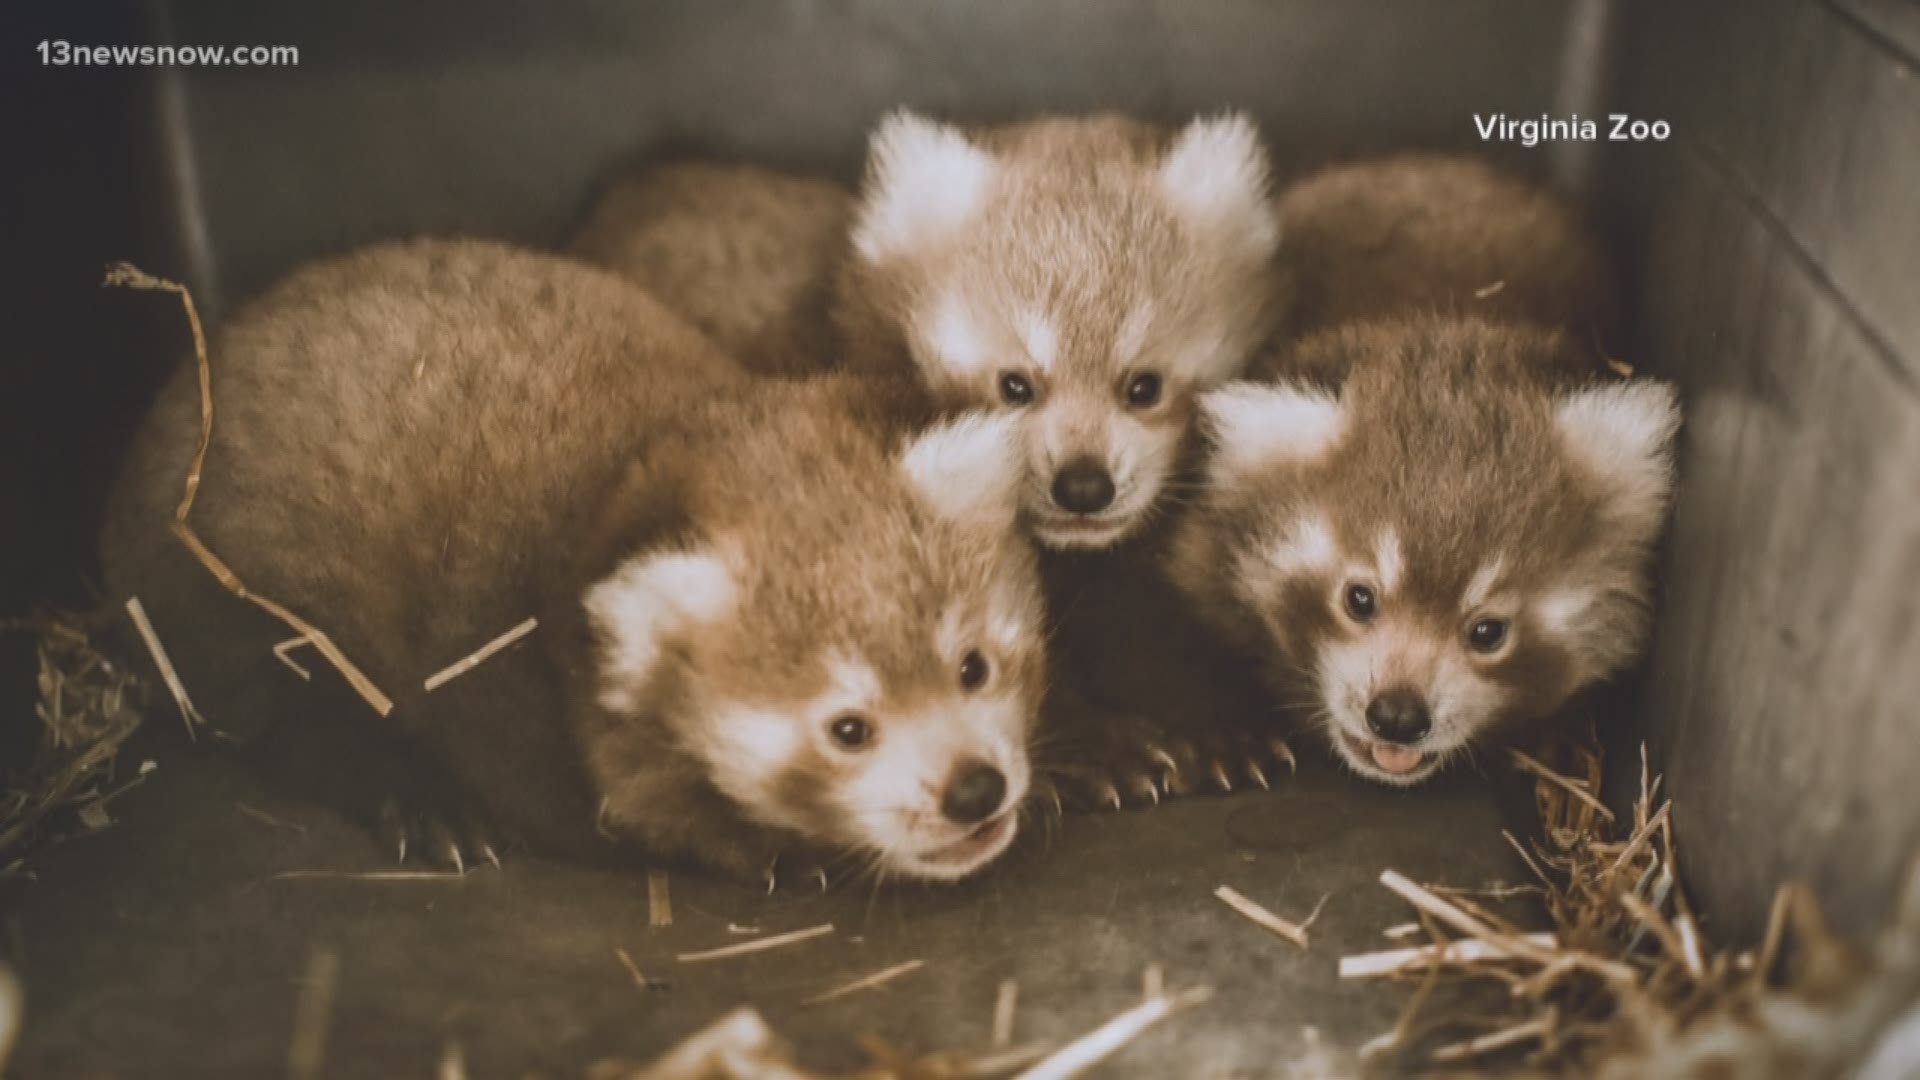 It didn't take long for the red panda triplets to have their names picked. The Zoo auctioned off the rights to name them, and it only took a few days for the auction to close.